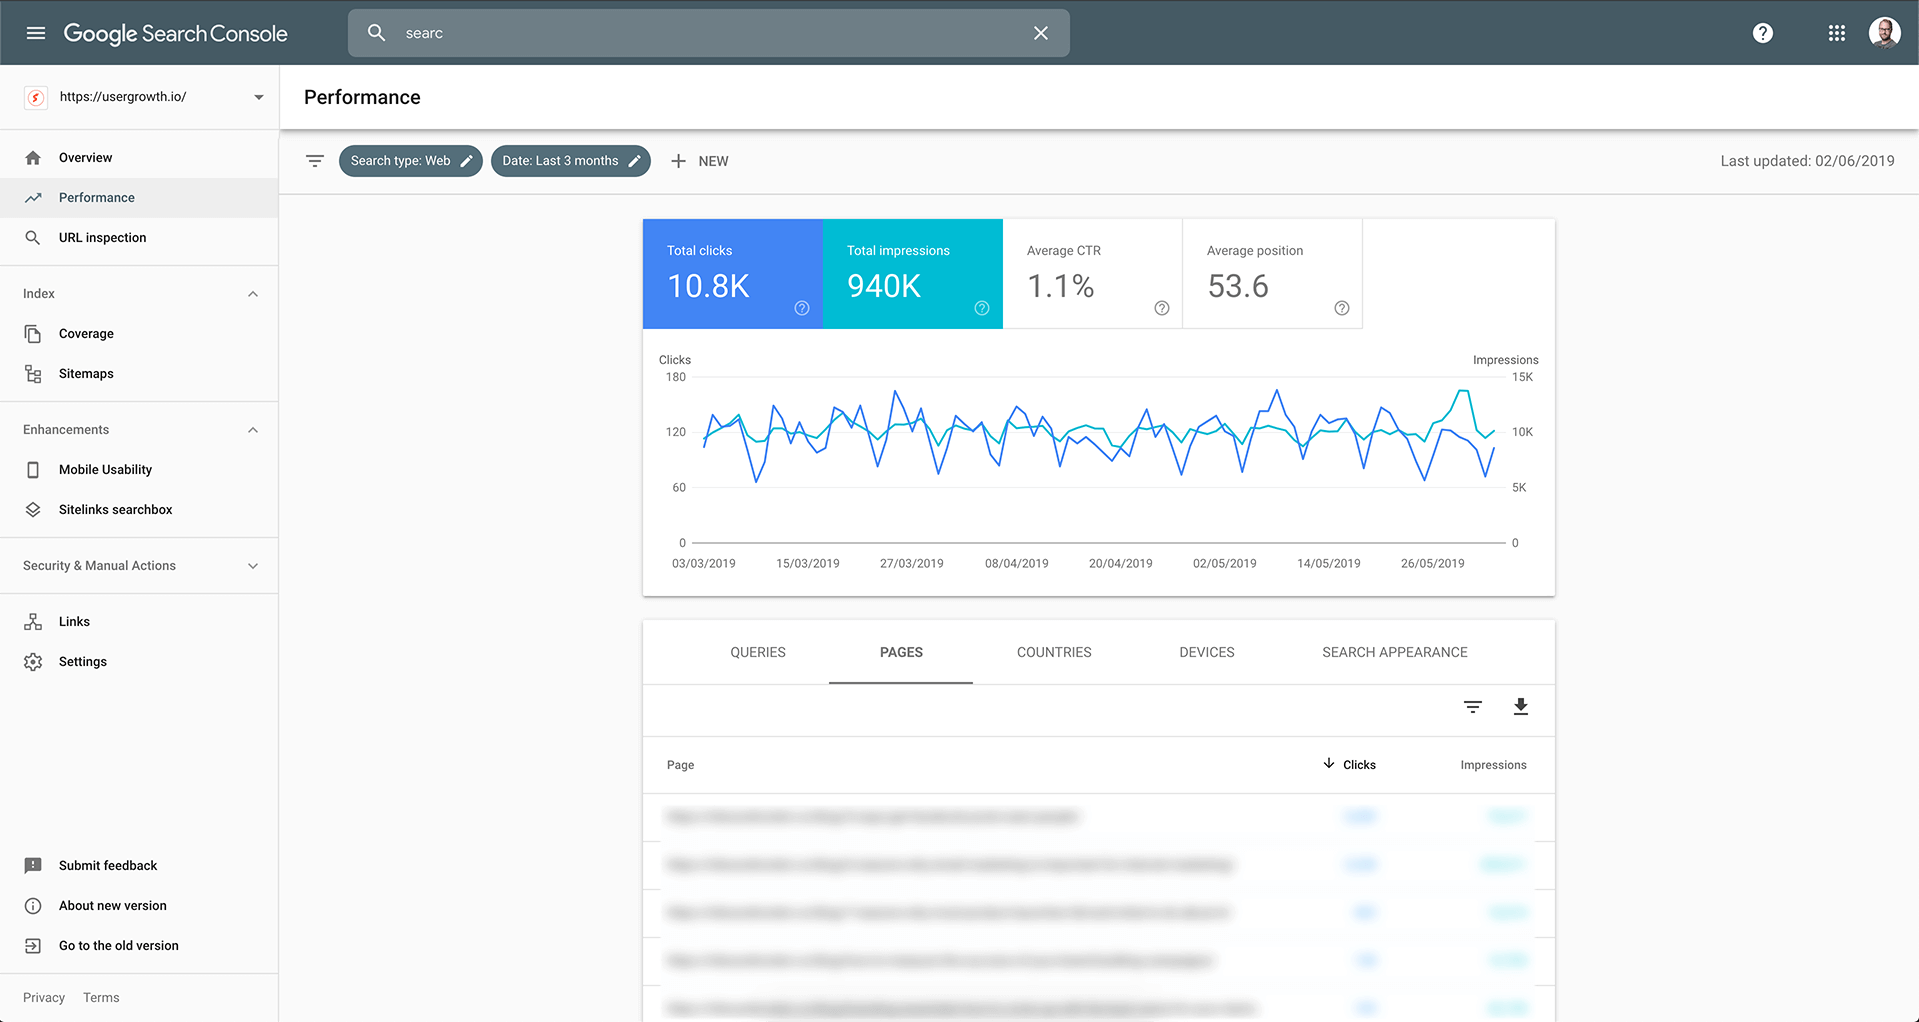 Getting all pages that get impressions in the SERP from Google Search Console